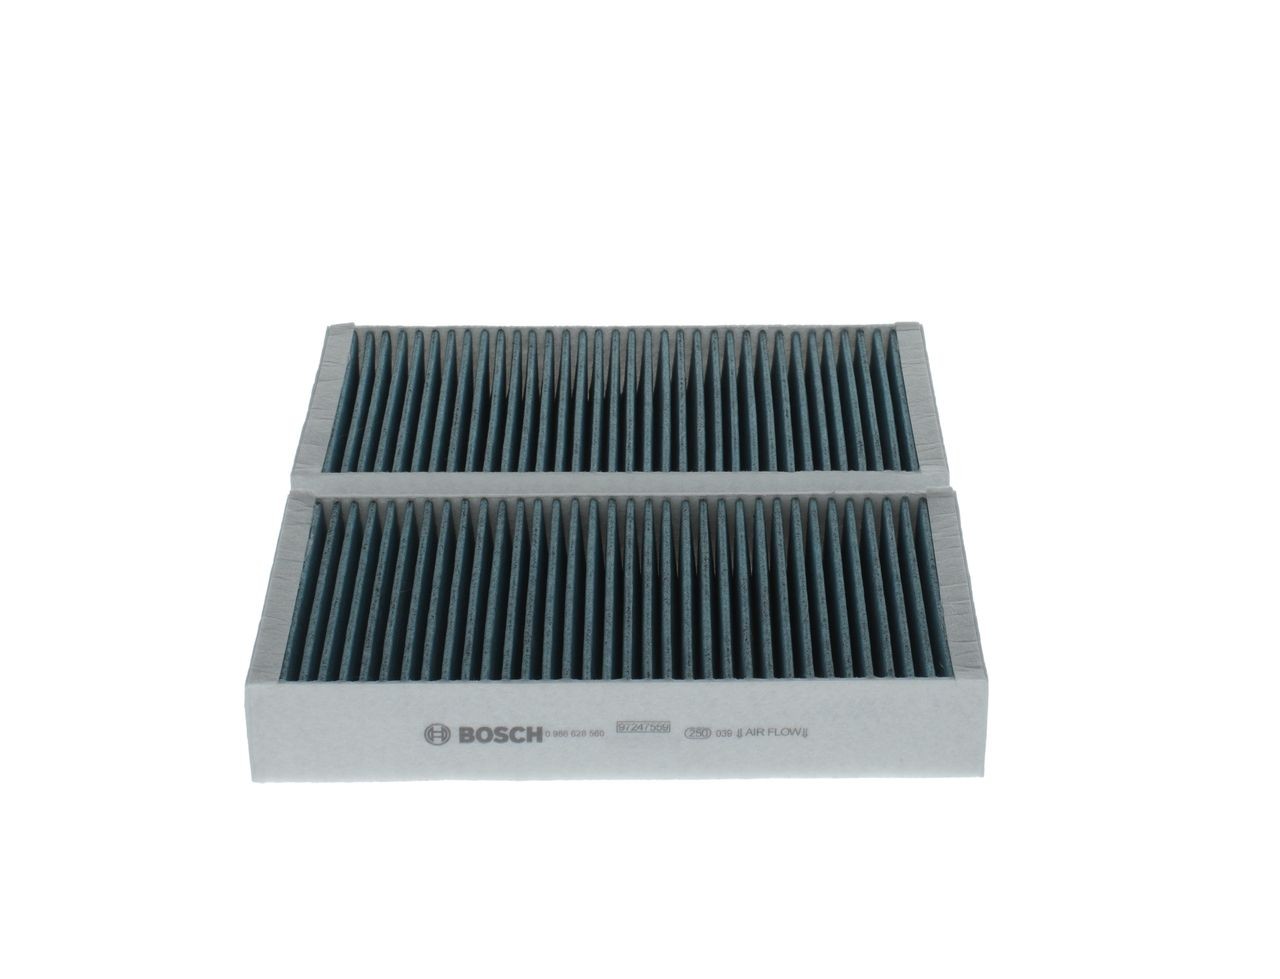 0986628560 Air con filter A 8560 BOSCH Activated Carbon Filter, 253 mm x 134 mm x 40 mm